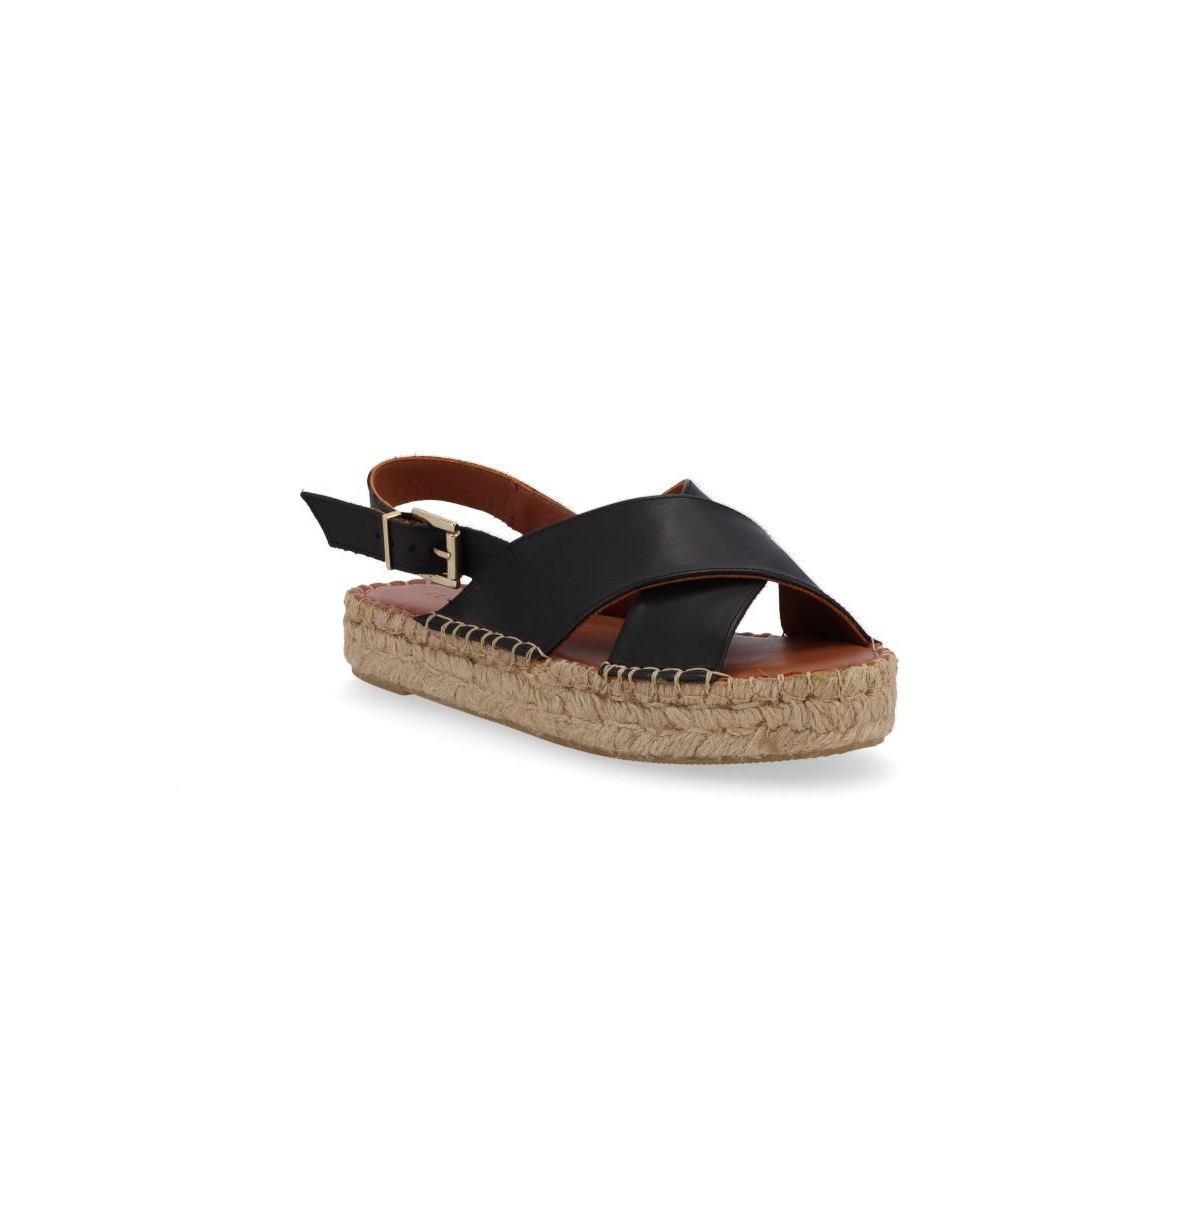 Women's Crossed Leather Sandals - Camel